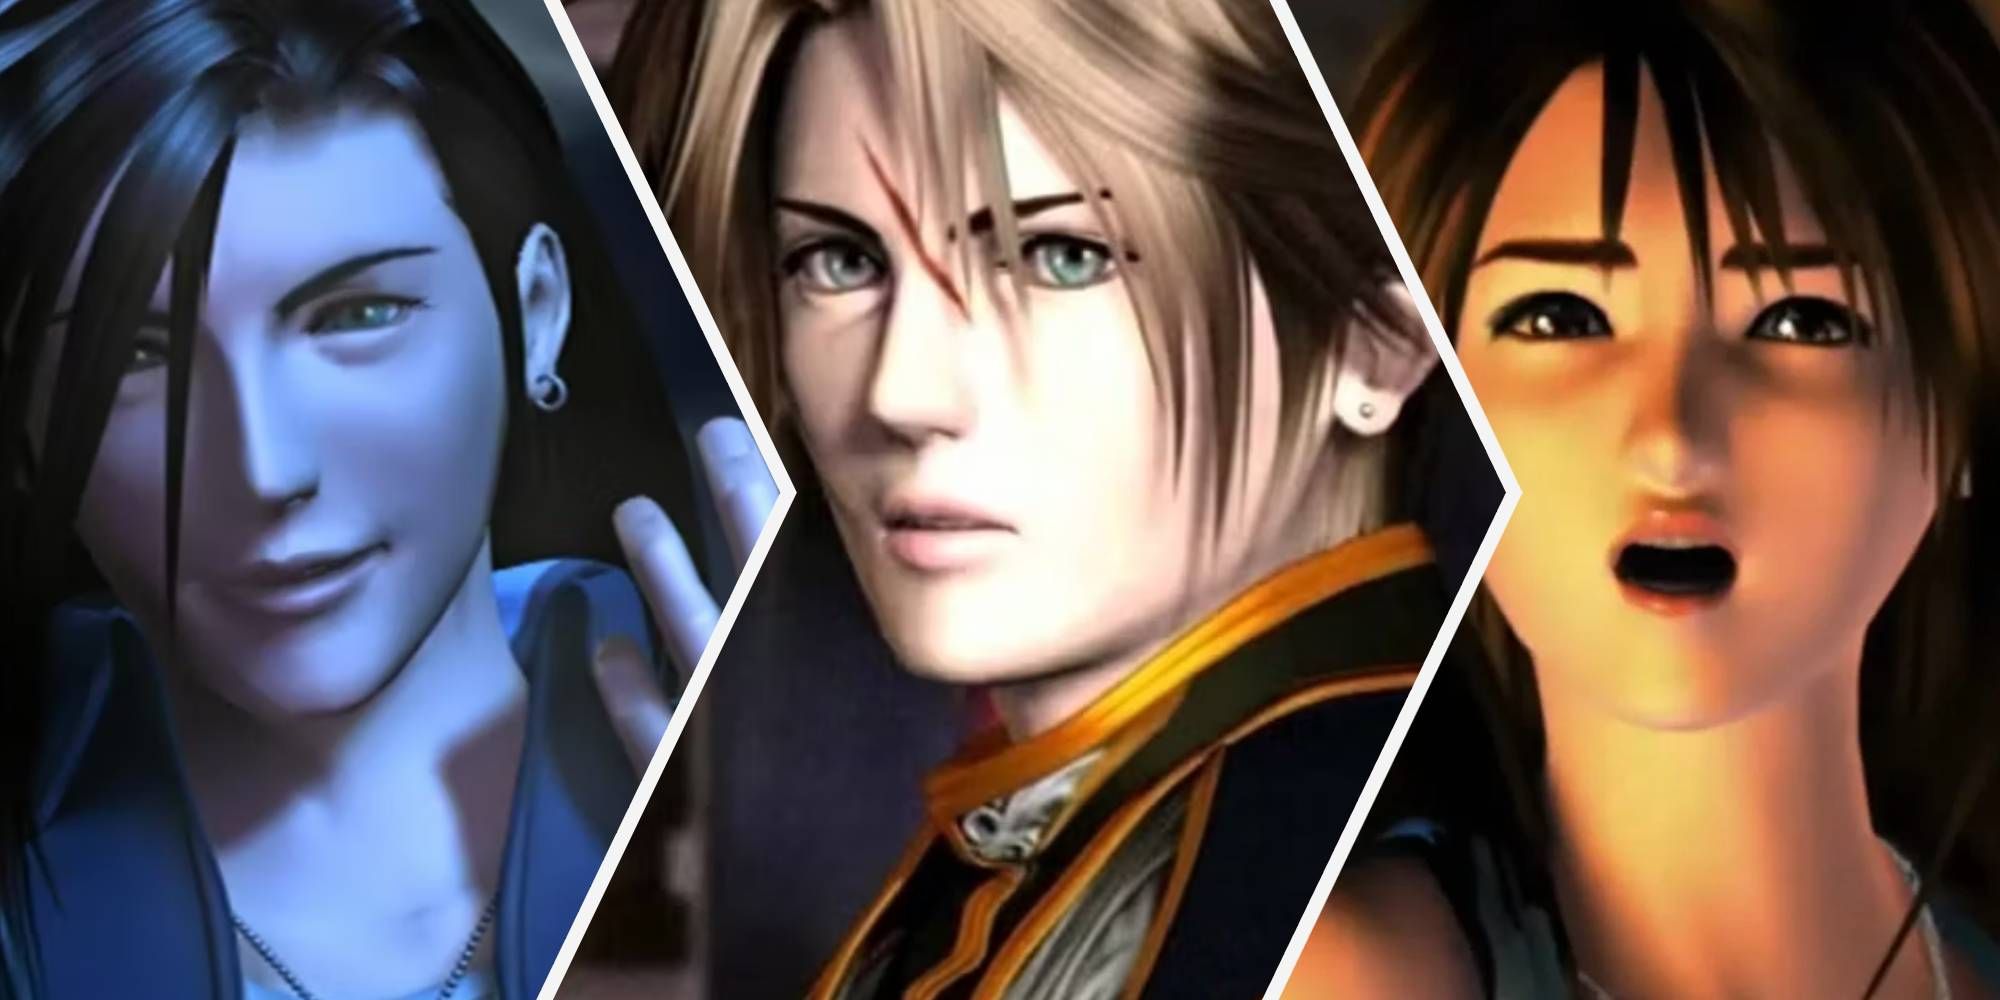 Final Fantasy 10: Every Playable Character, Ranked By Power